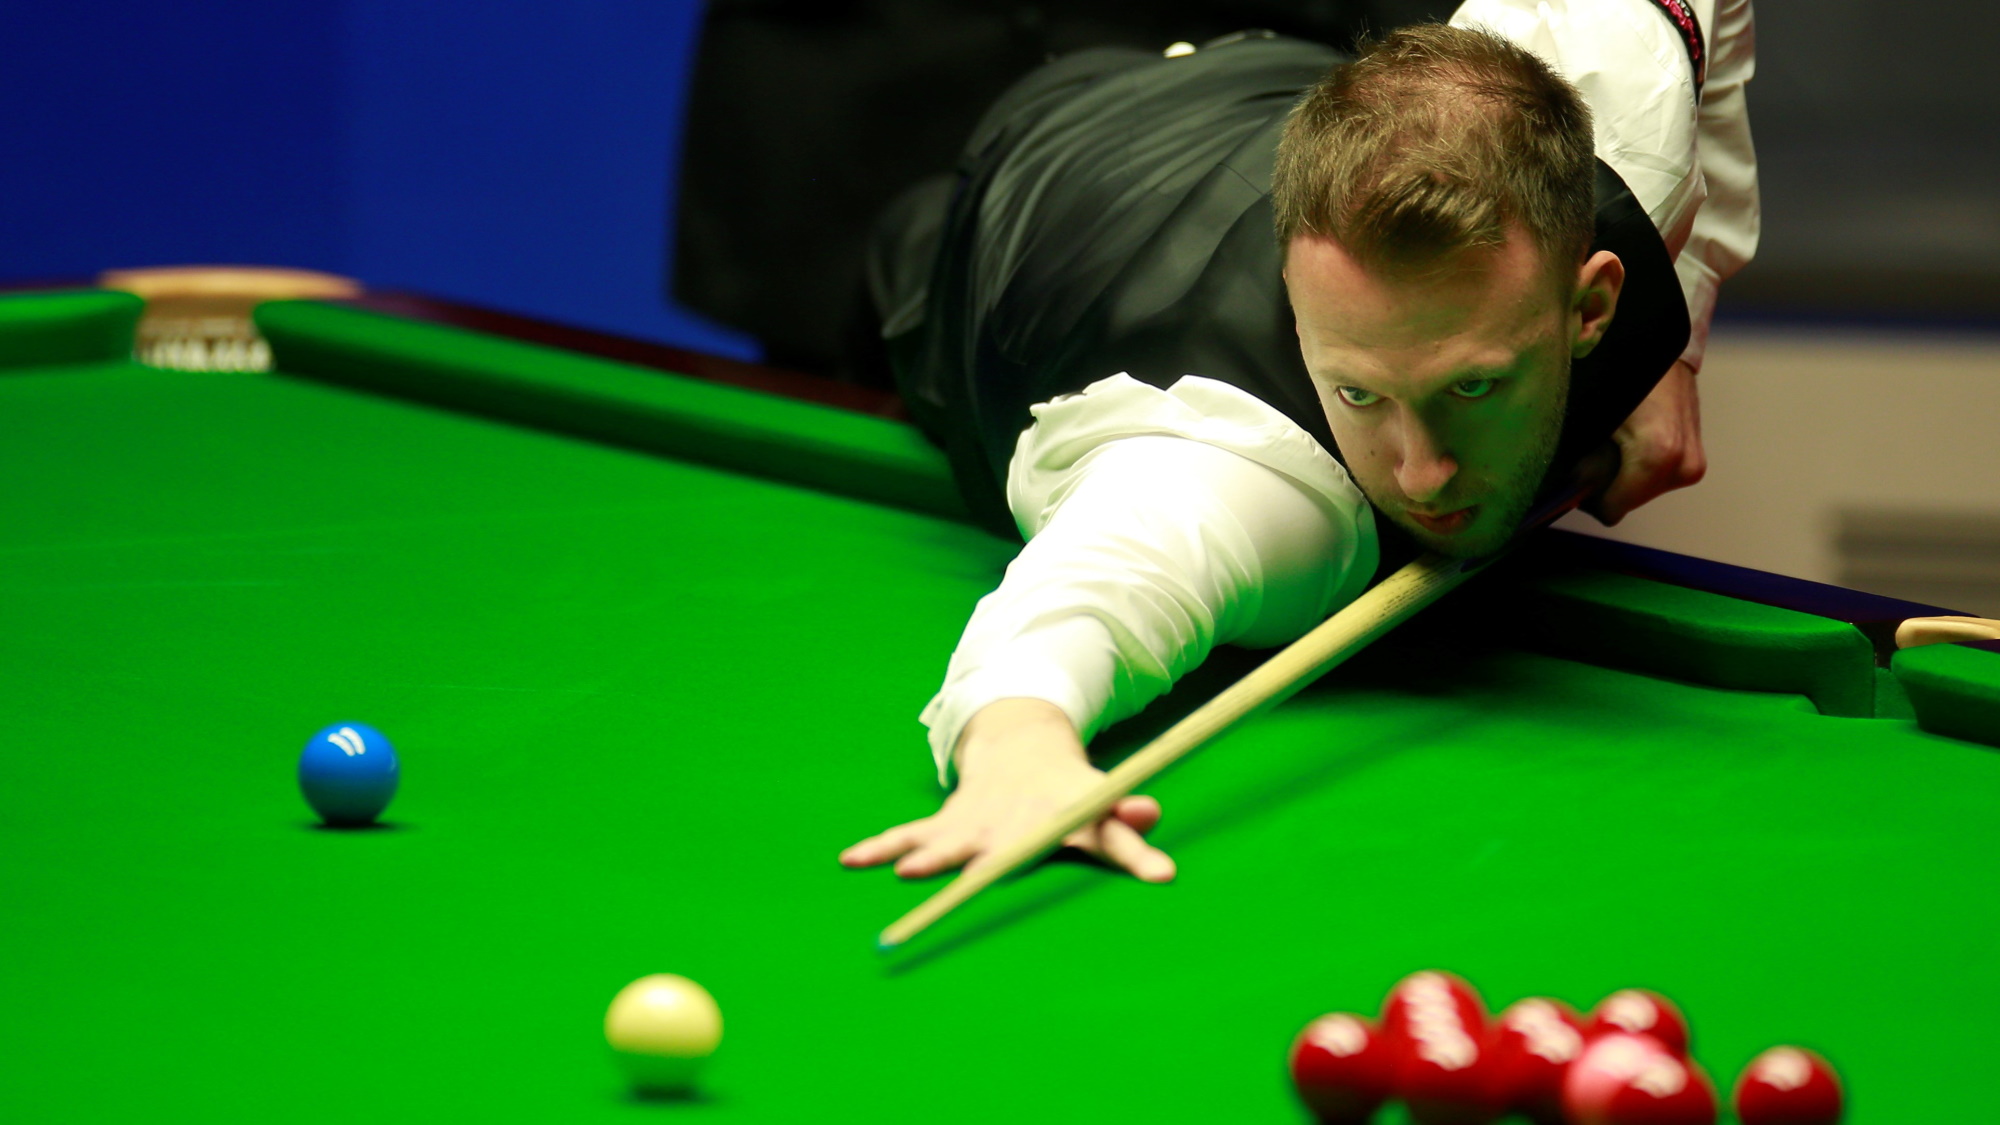 world snooker streaming live